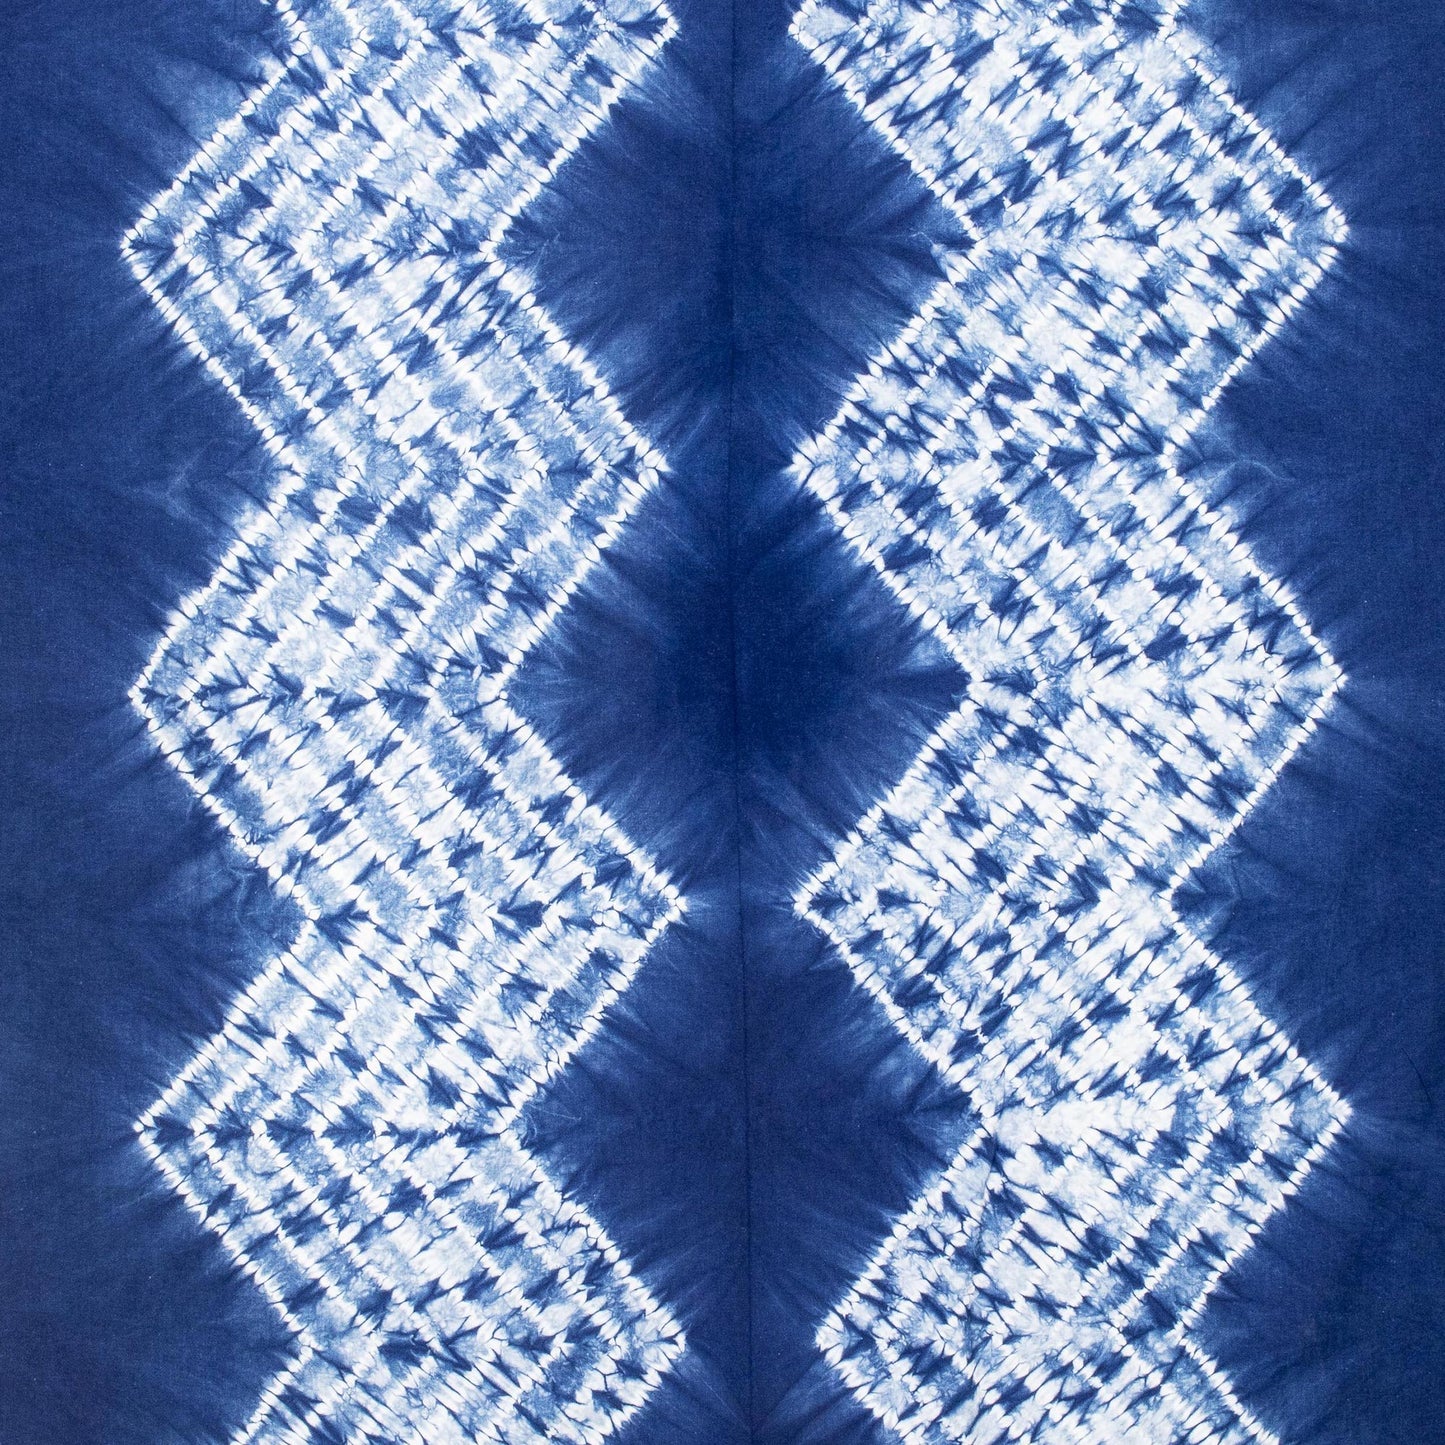 Ancestral Techniques Tie-Dyed Cotton Tablecloth from Guatemala